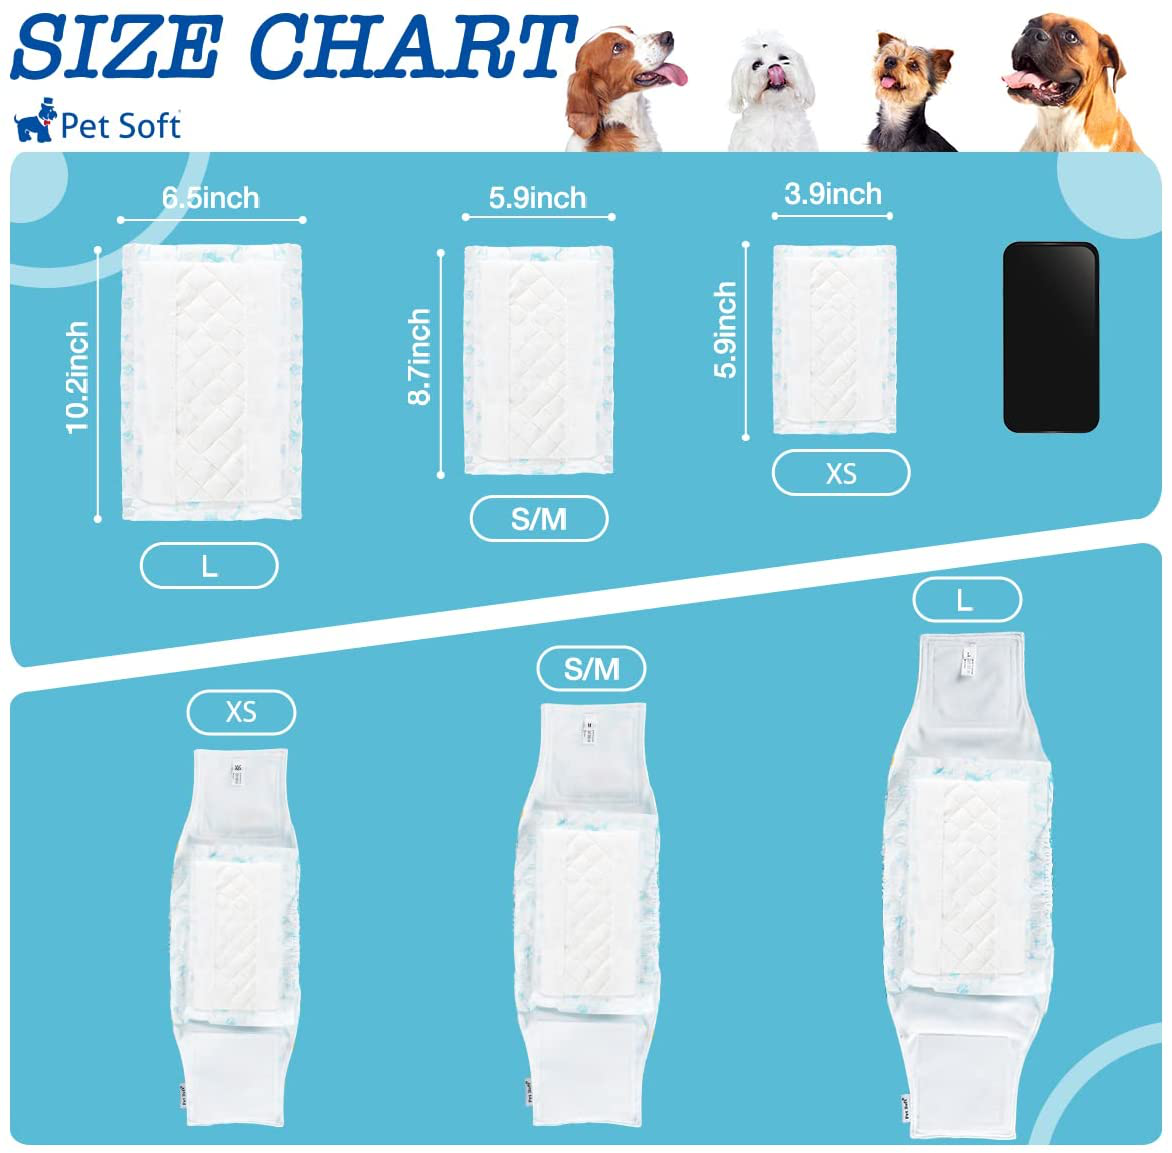 Pet Soft Dog Diaper Liners - Disposable Dog Diaper Inserts Booster Pads for Doggy Puppy Fit Reusable Pet Belly Band Wrap Period Panties 50/100Ct